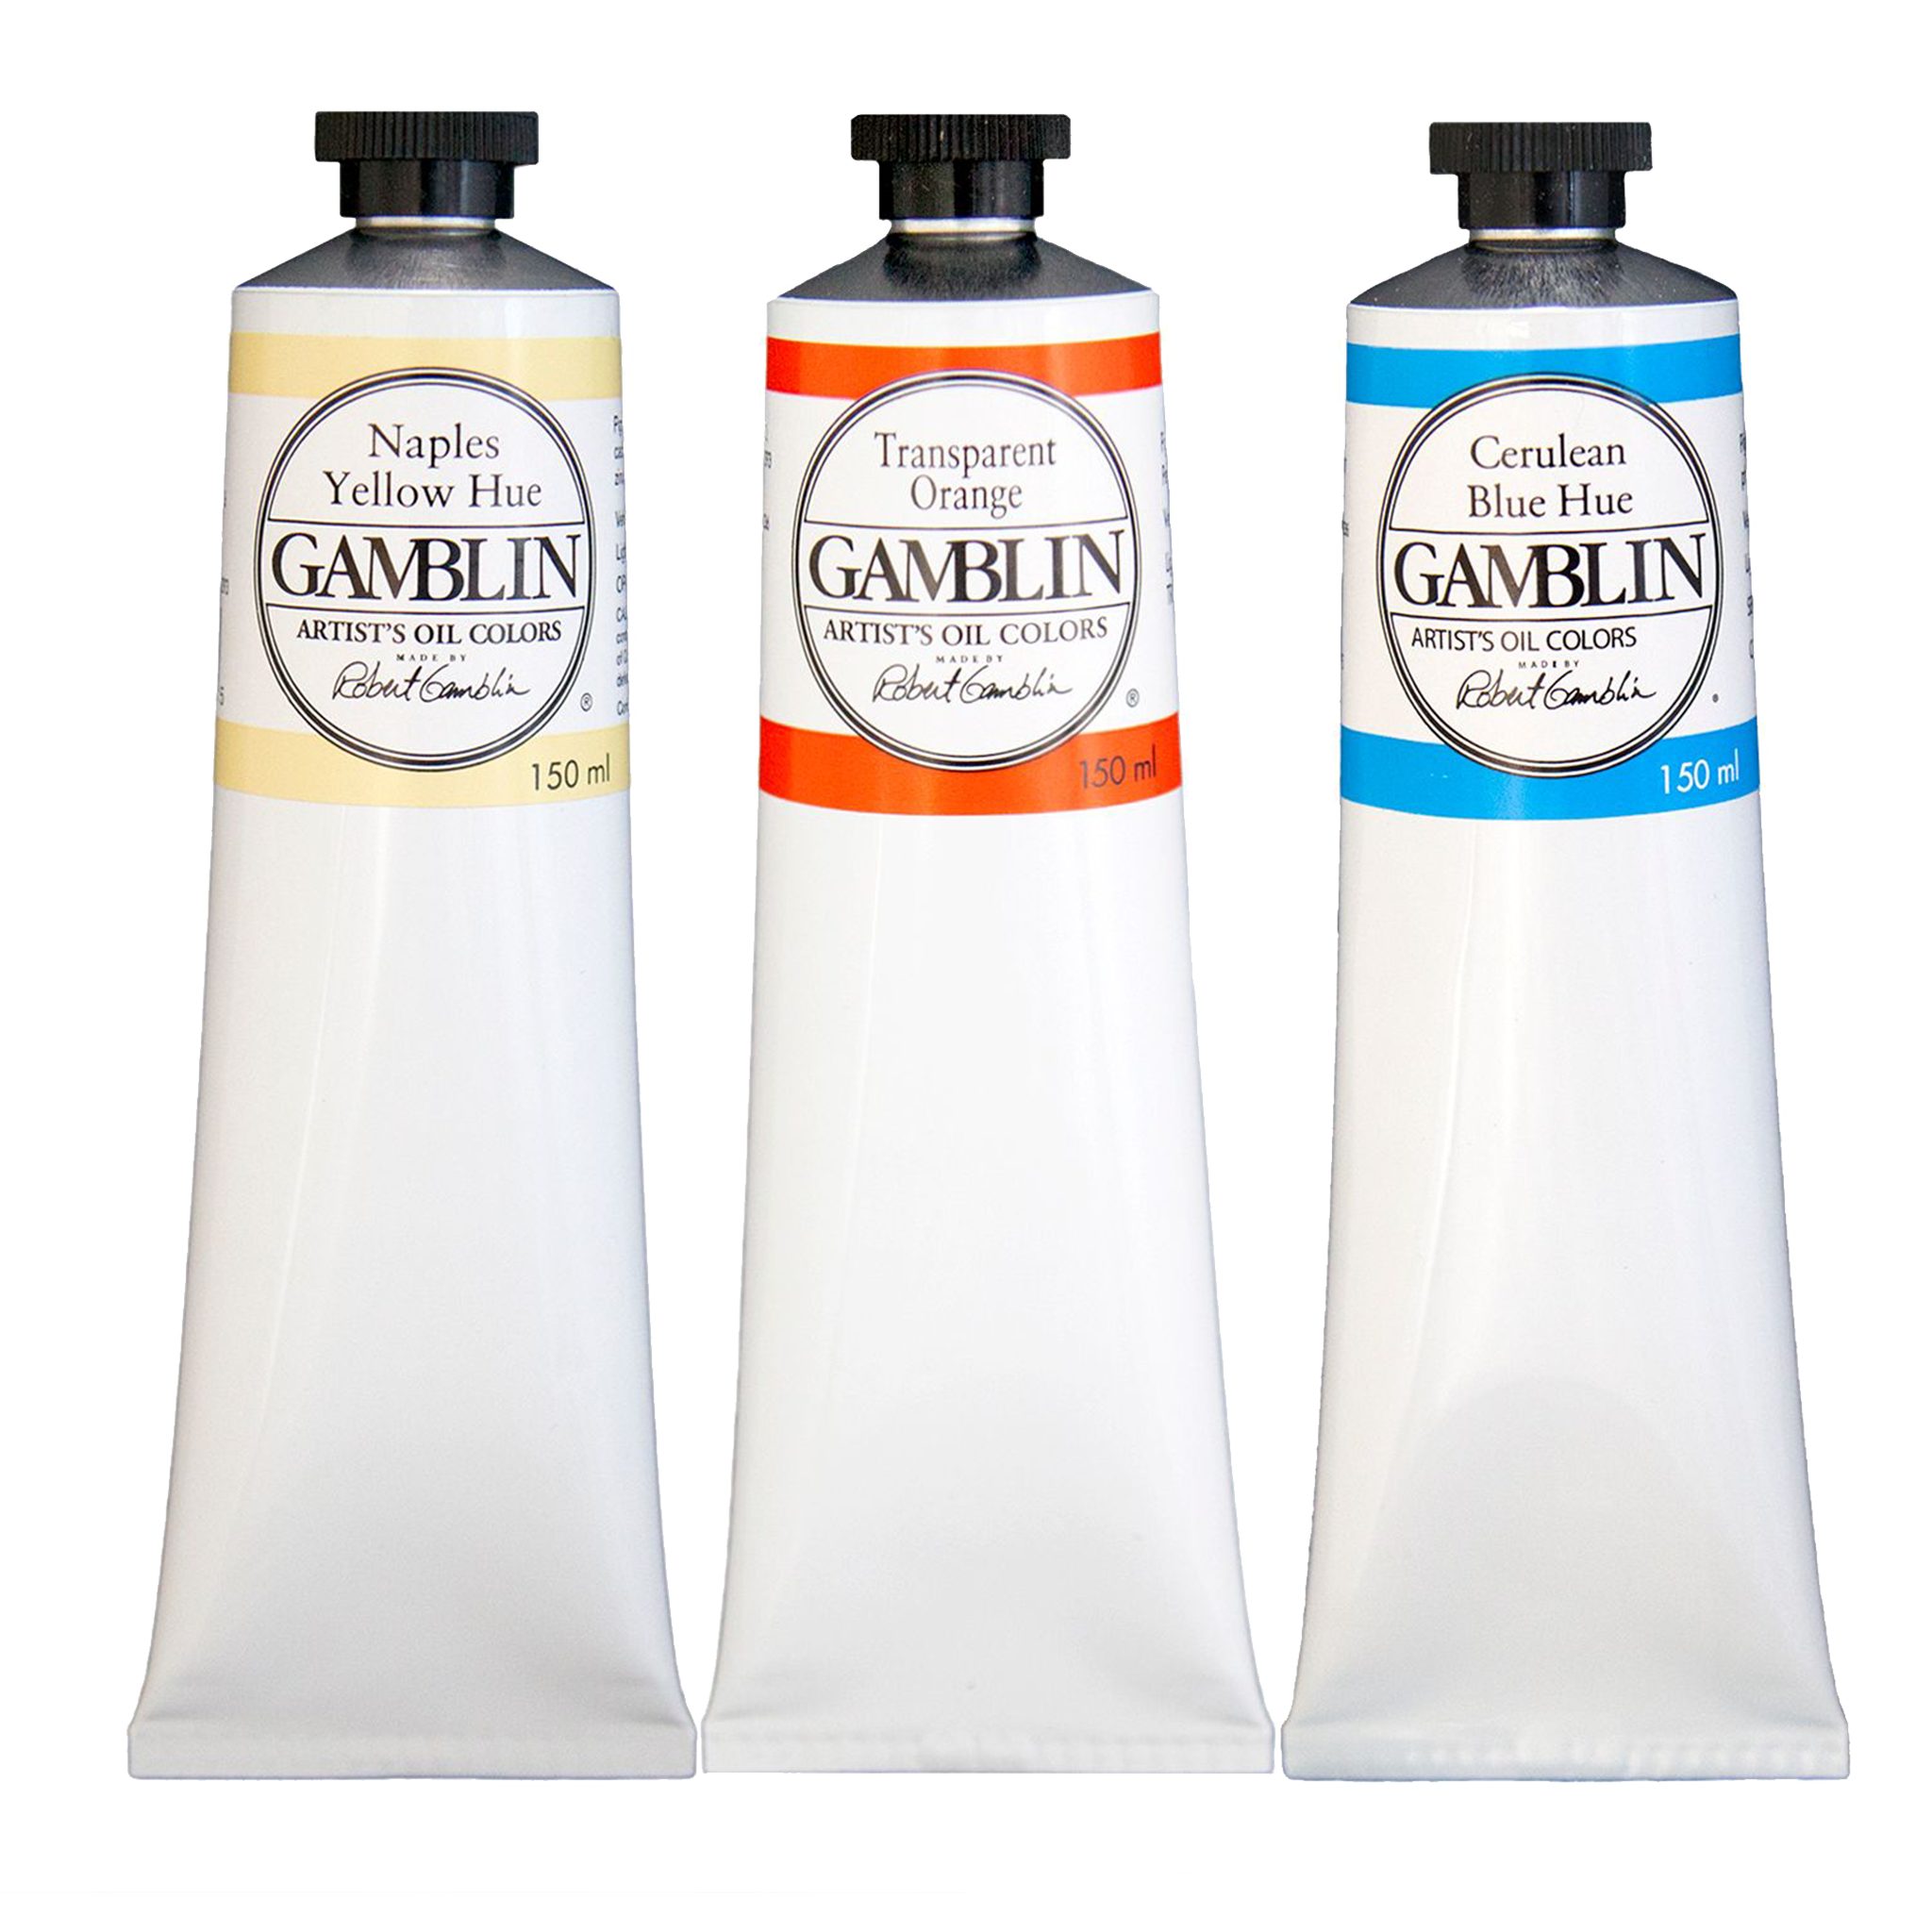 Gamblin Linseed Oil Cold Pressed - Judsons Art Outfitters